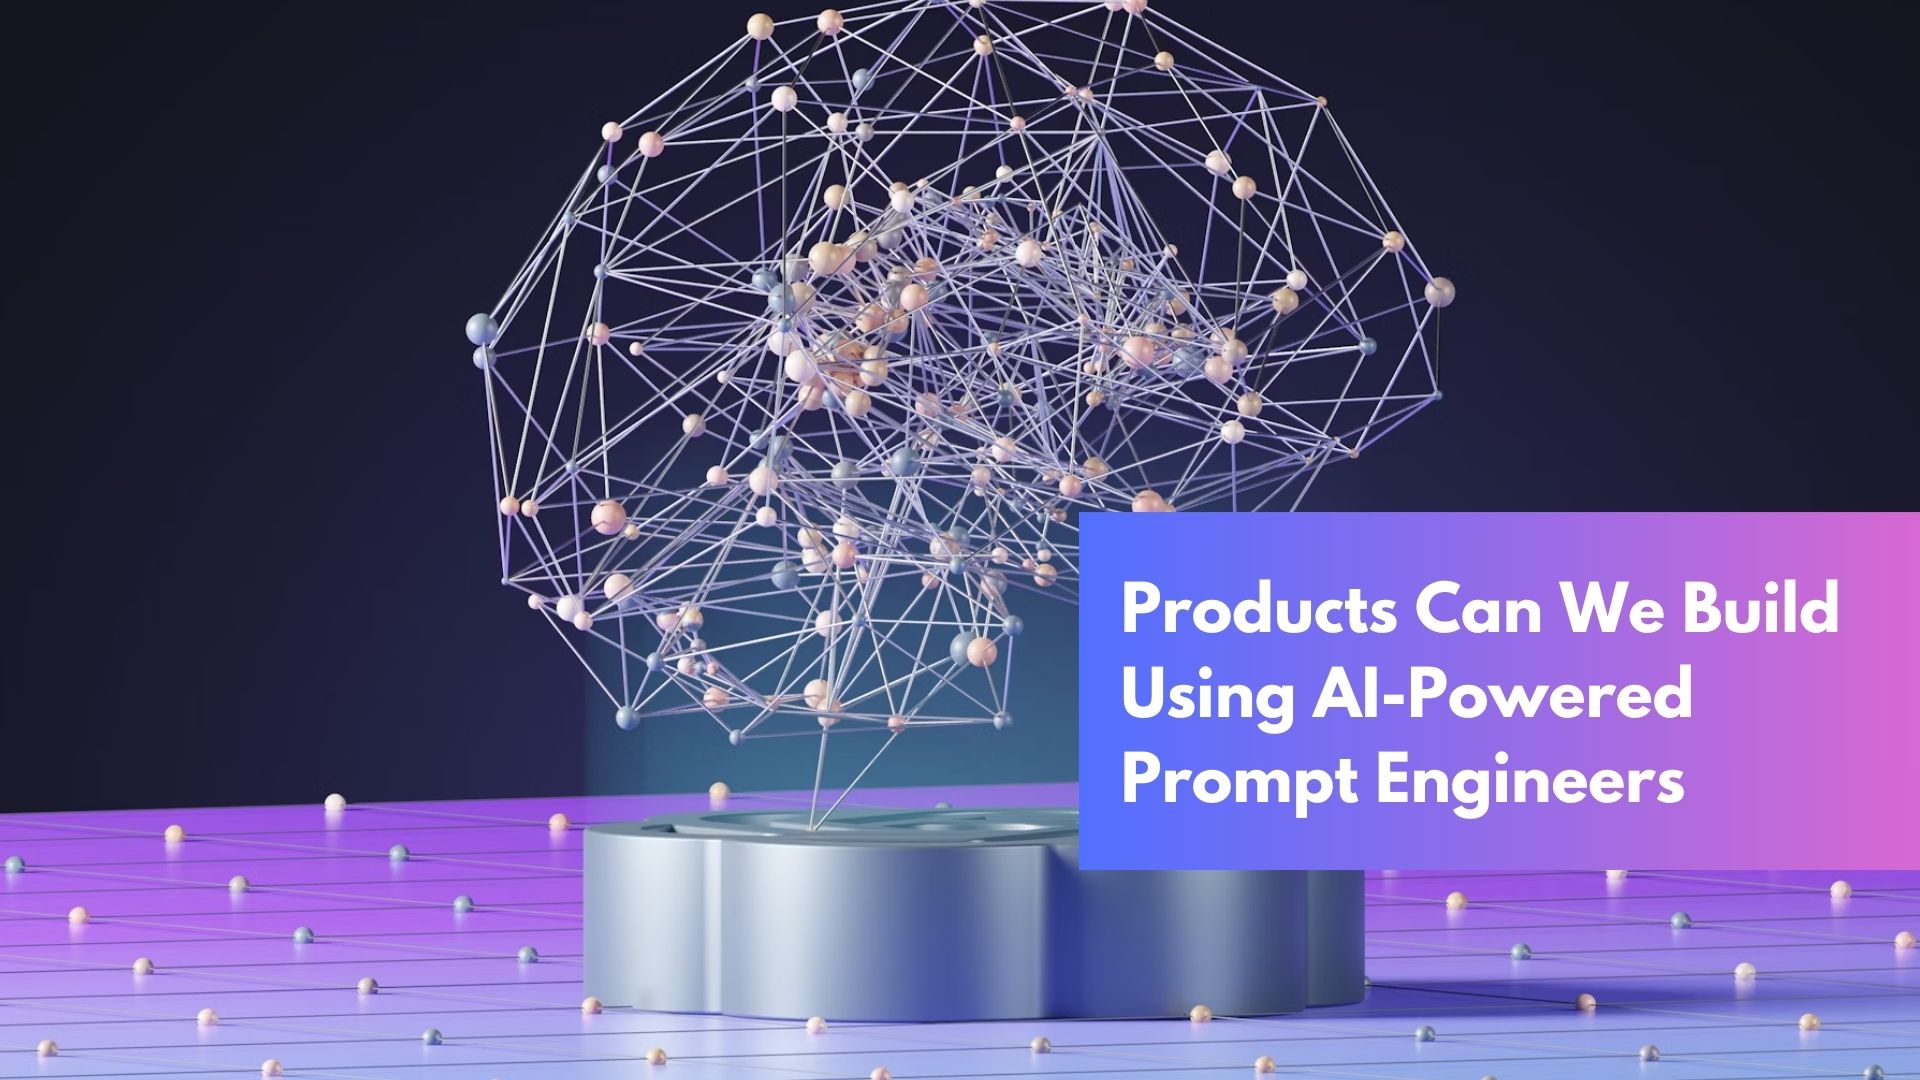 Products Can We Build Using AI-Powered Prompt Engineers